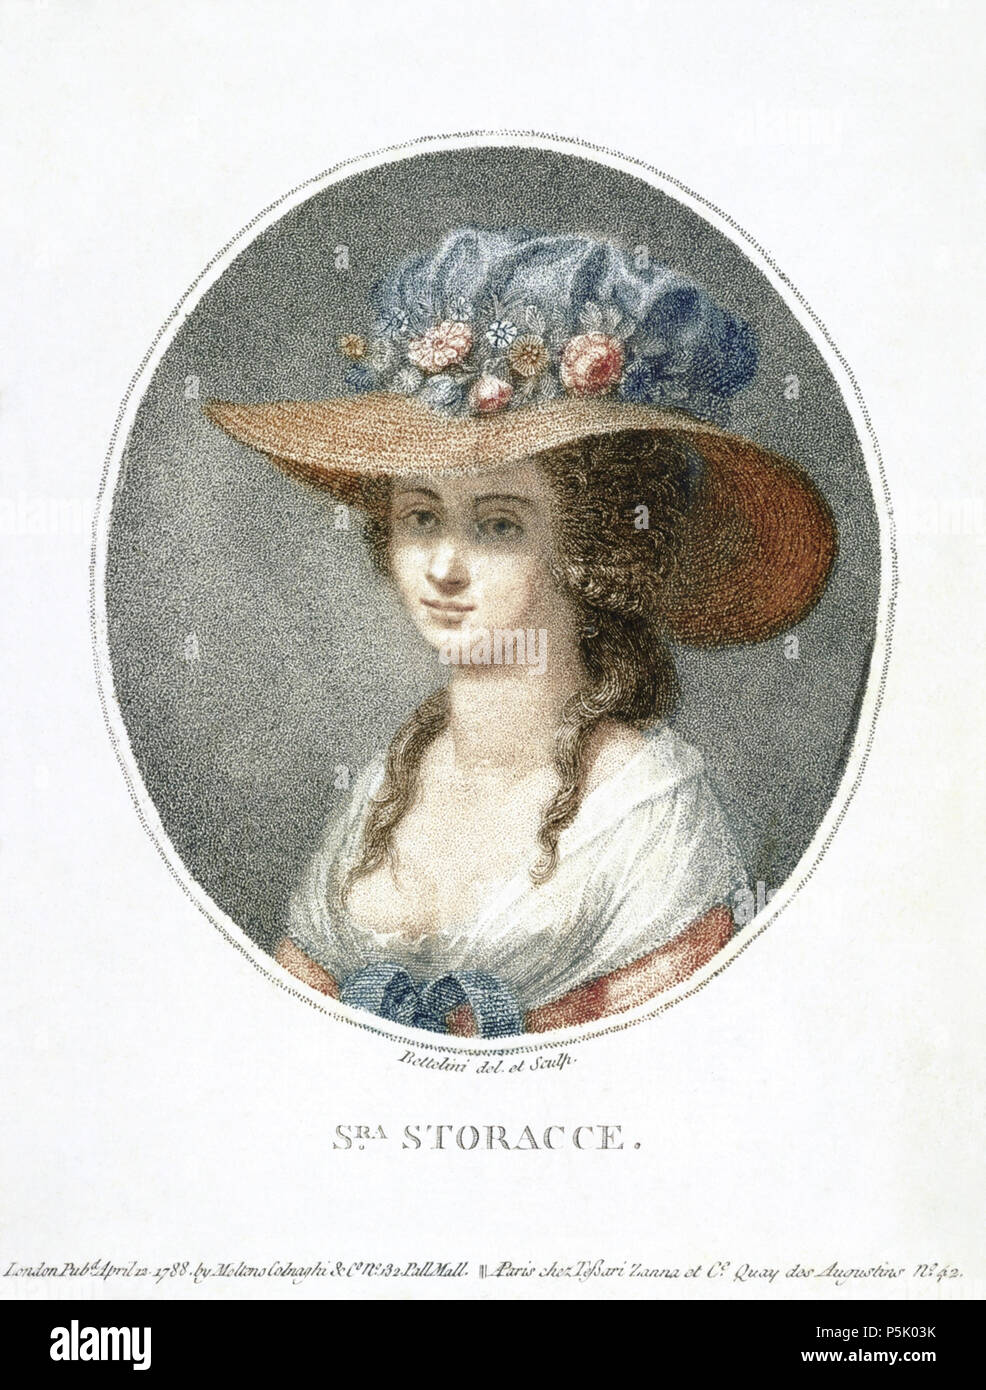 N/A.  Portrait of Nancy Storace (1765-1817), English soprano. Printed in April 12, 1788 by Moltens Colnaghi & Co No. 32 Pall Mall, and in Paris by chez Tessari Zanna et Ce. Quay de Augustins No 42.   This is a retouched picture, which means that it has been digitally altered from its original version. Modifications: There was a lot of staining to the paper, and one or two bits where either the hand-tinting hadn't been done very well, or water damage had occured. As the hand-tinting was generally done as a batch, and not by the artist who made the original engraving, I decided to try and make i Stock Photo